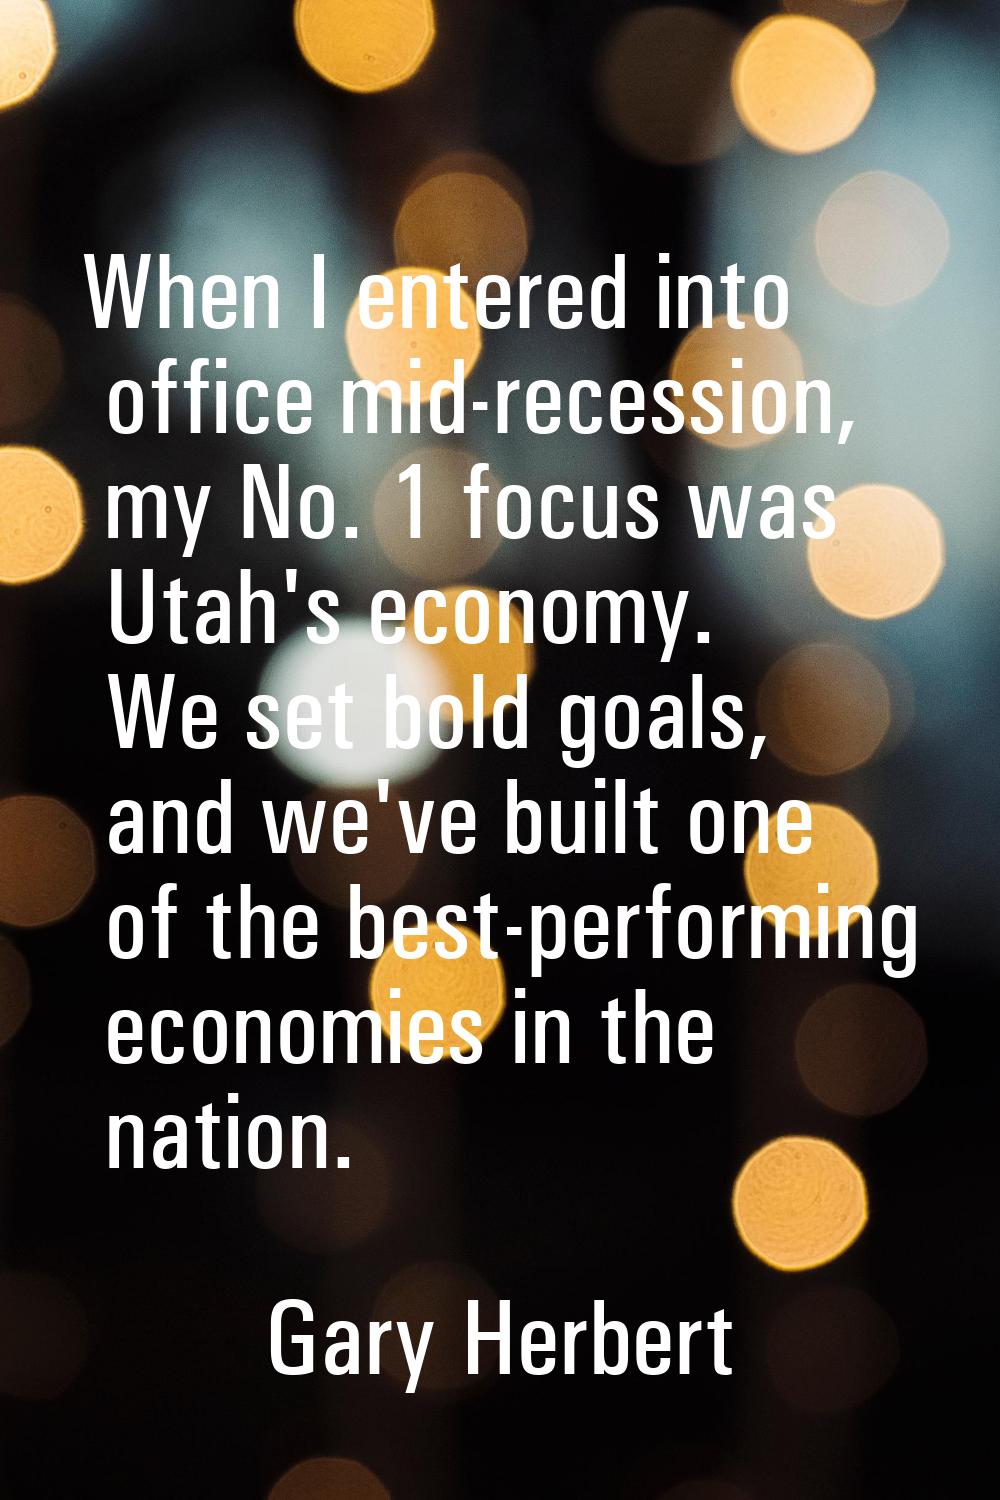 When I entered into office mid-recession, my No. 1 focus was Utah's economy. We set bold goals, and